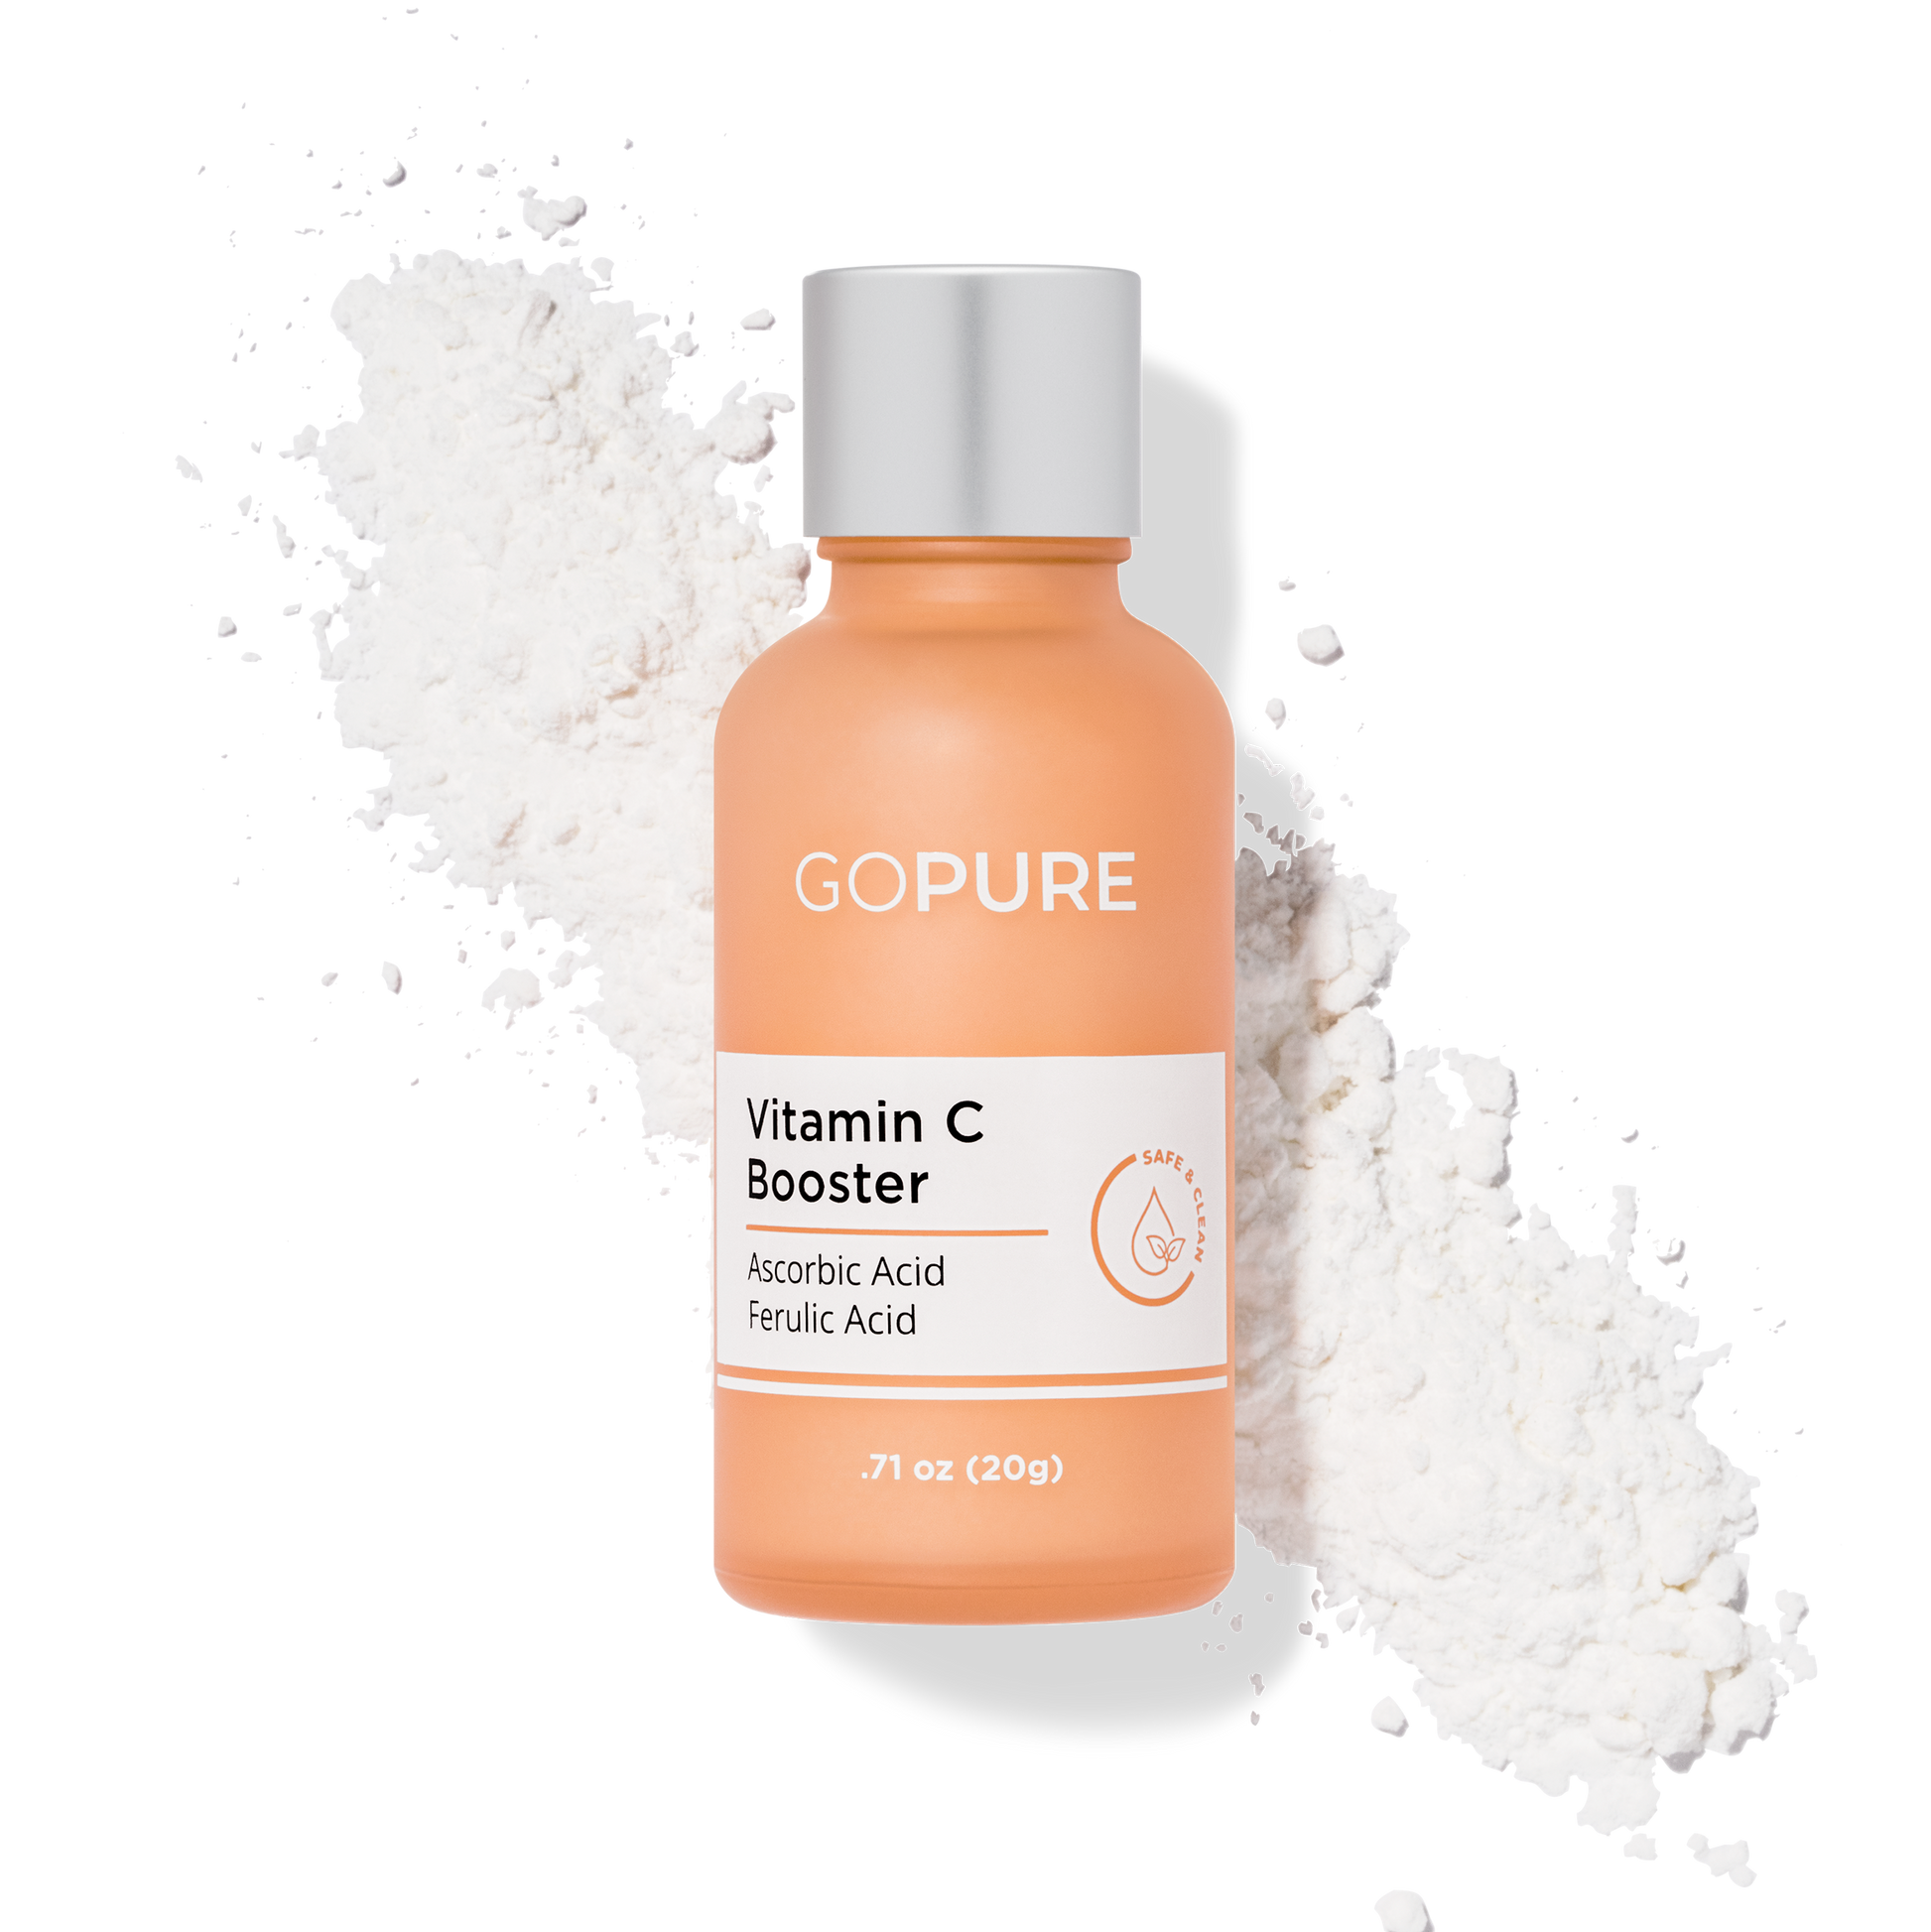 Peach-hued bottle of GoPure Vitamin C Booster next to a white powder scatter, highlighting Ascorbic Acid and Ferulic Acid, .71 oz (20g).